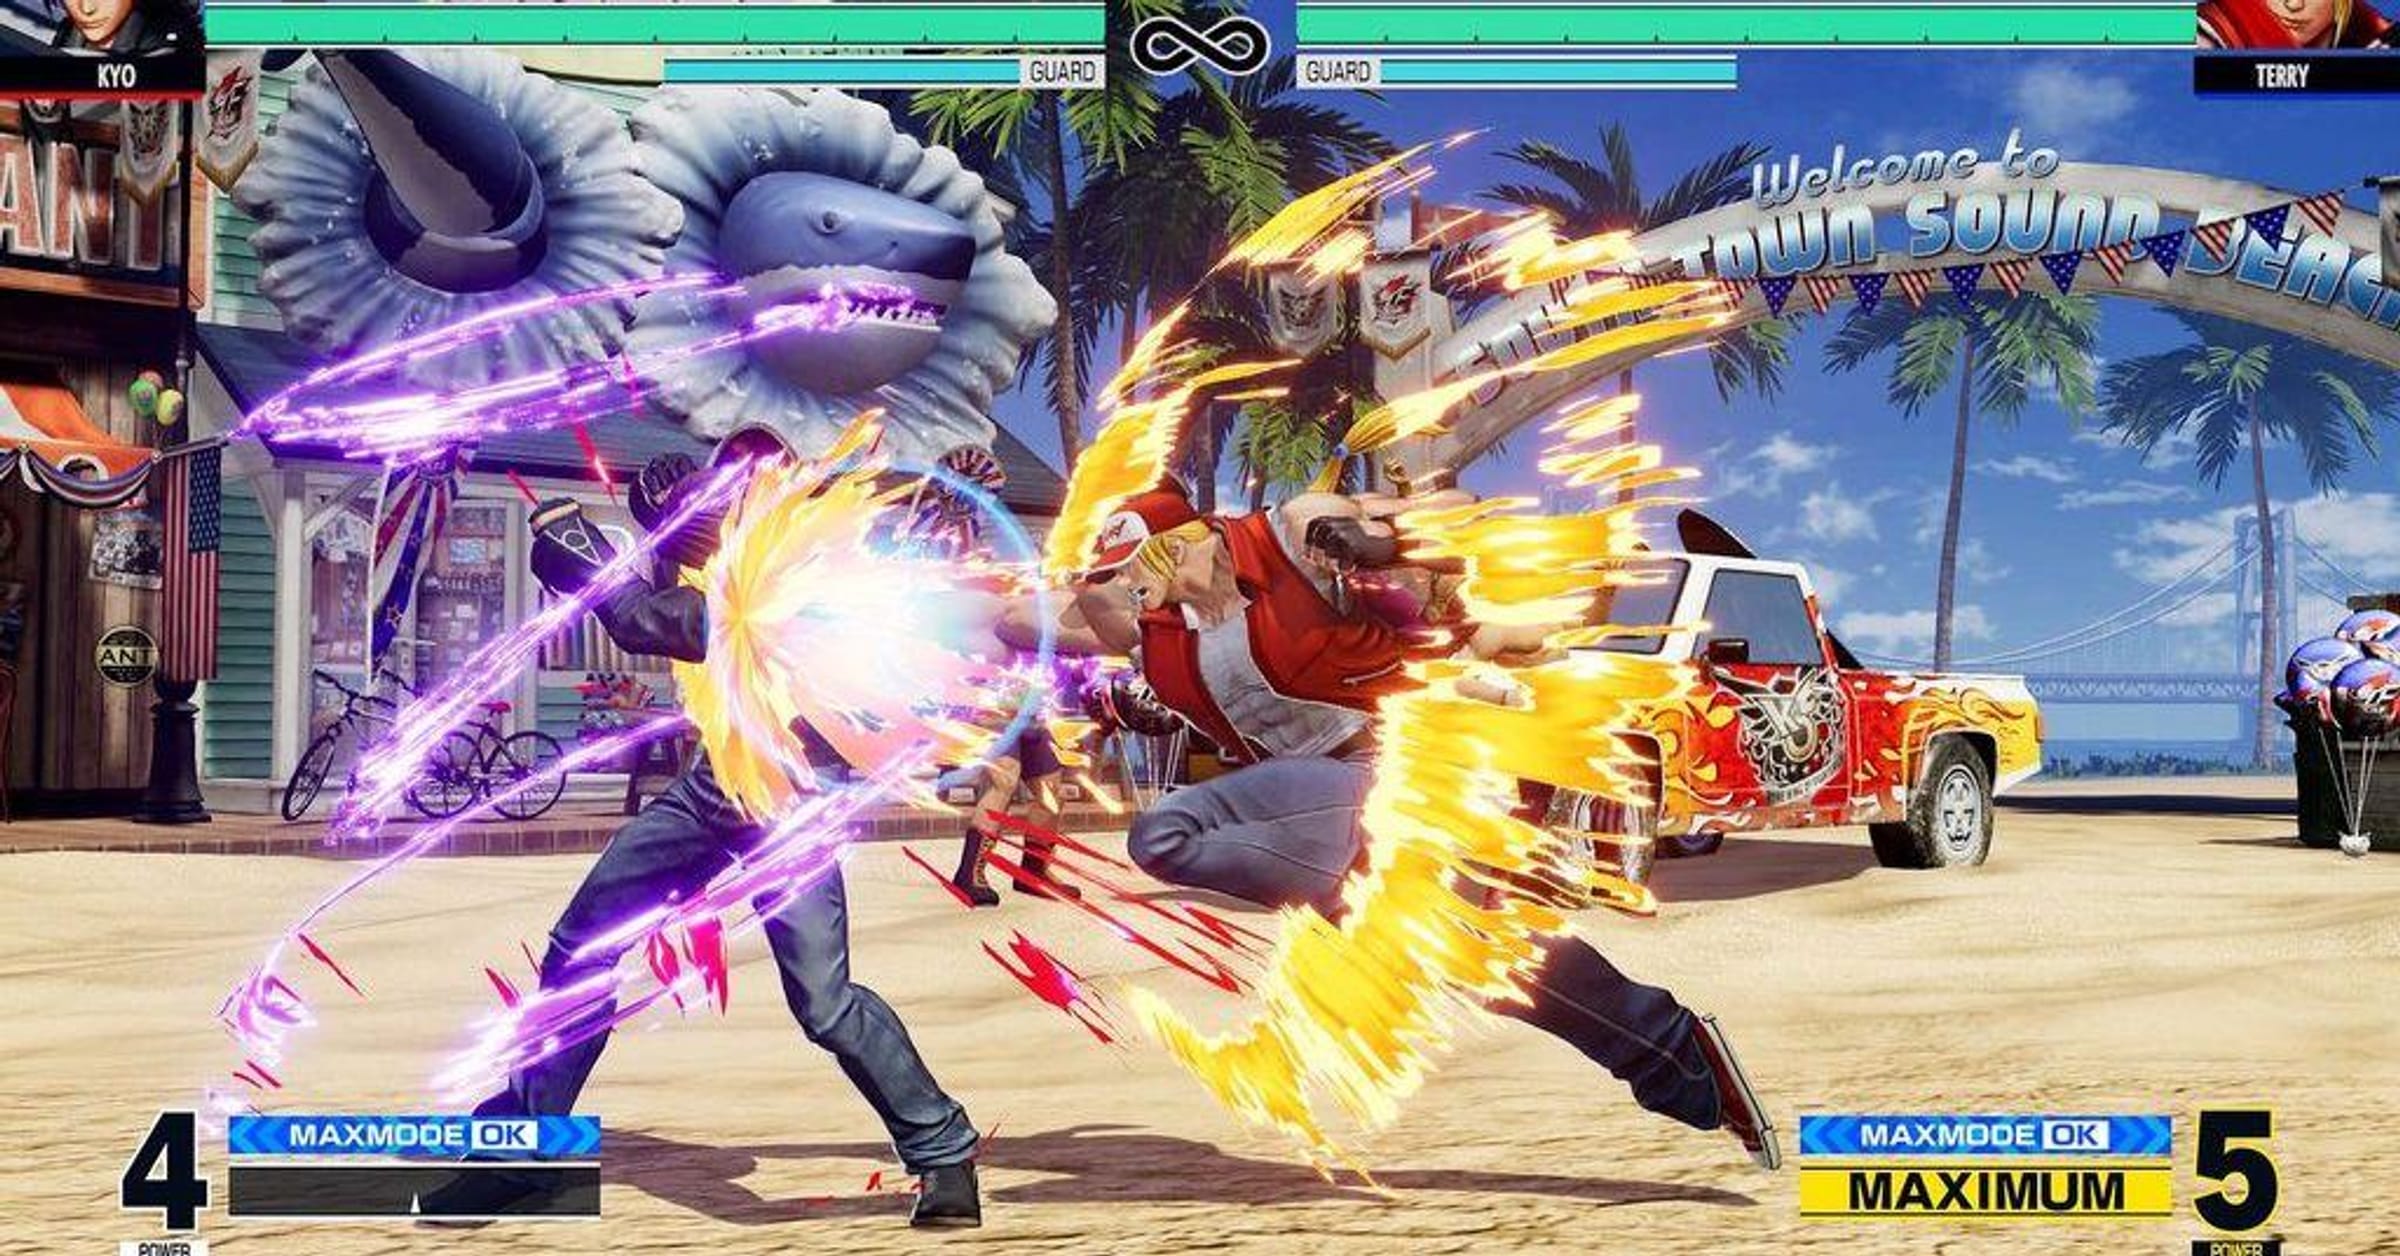 MultiVersus is More Popular Than All Other Fighting Games Says